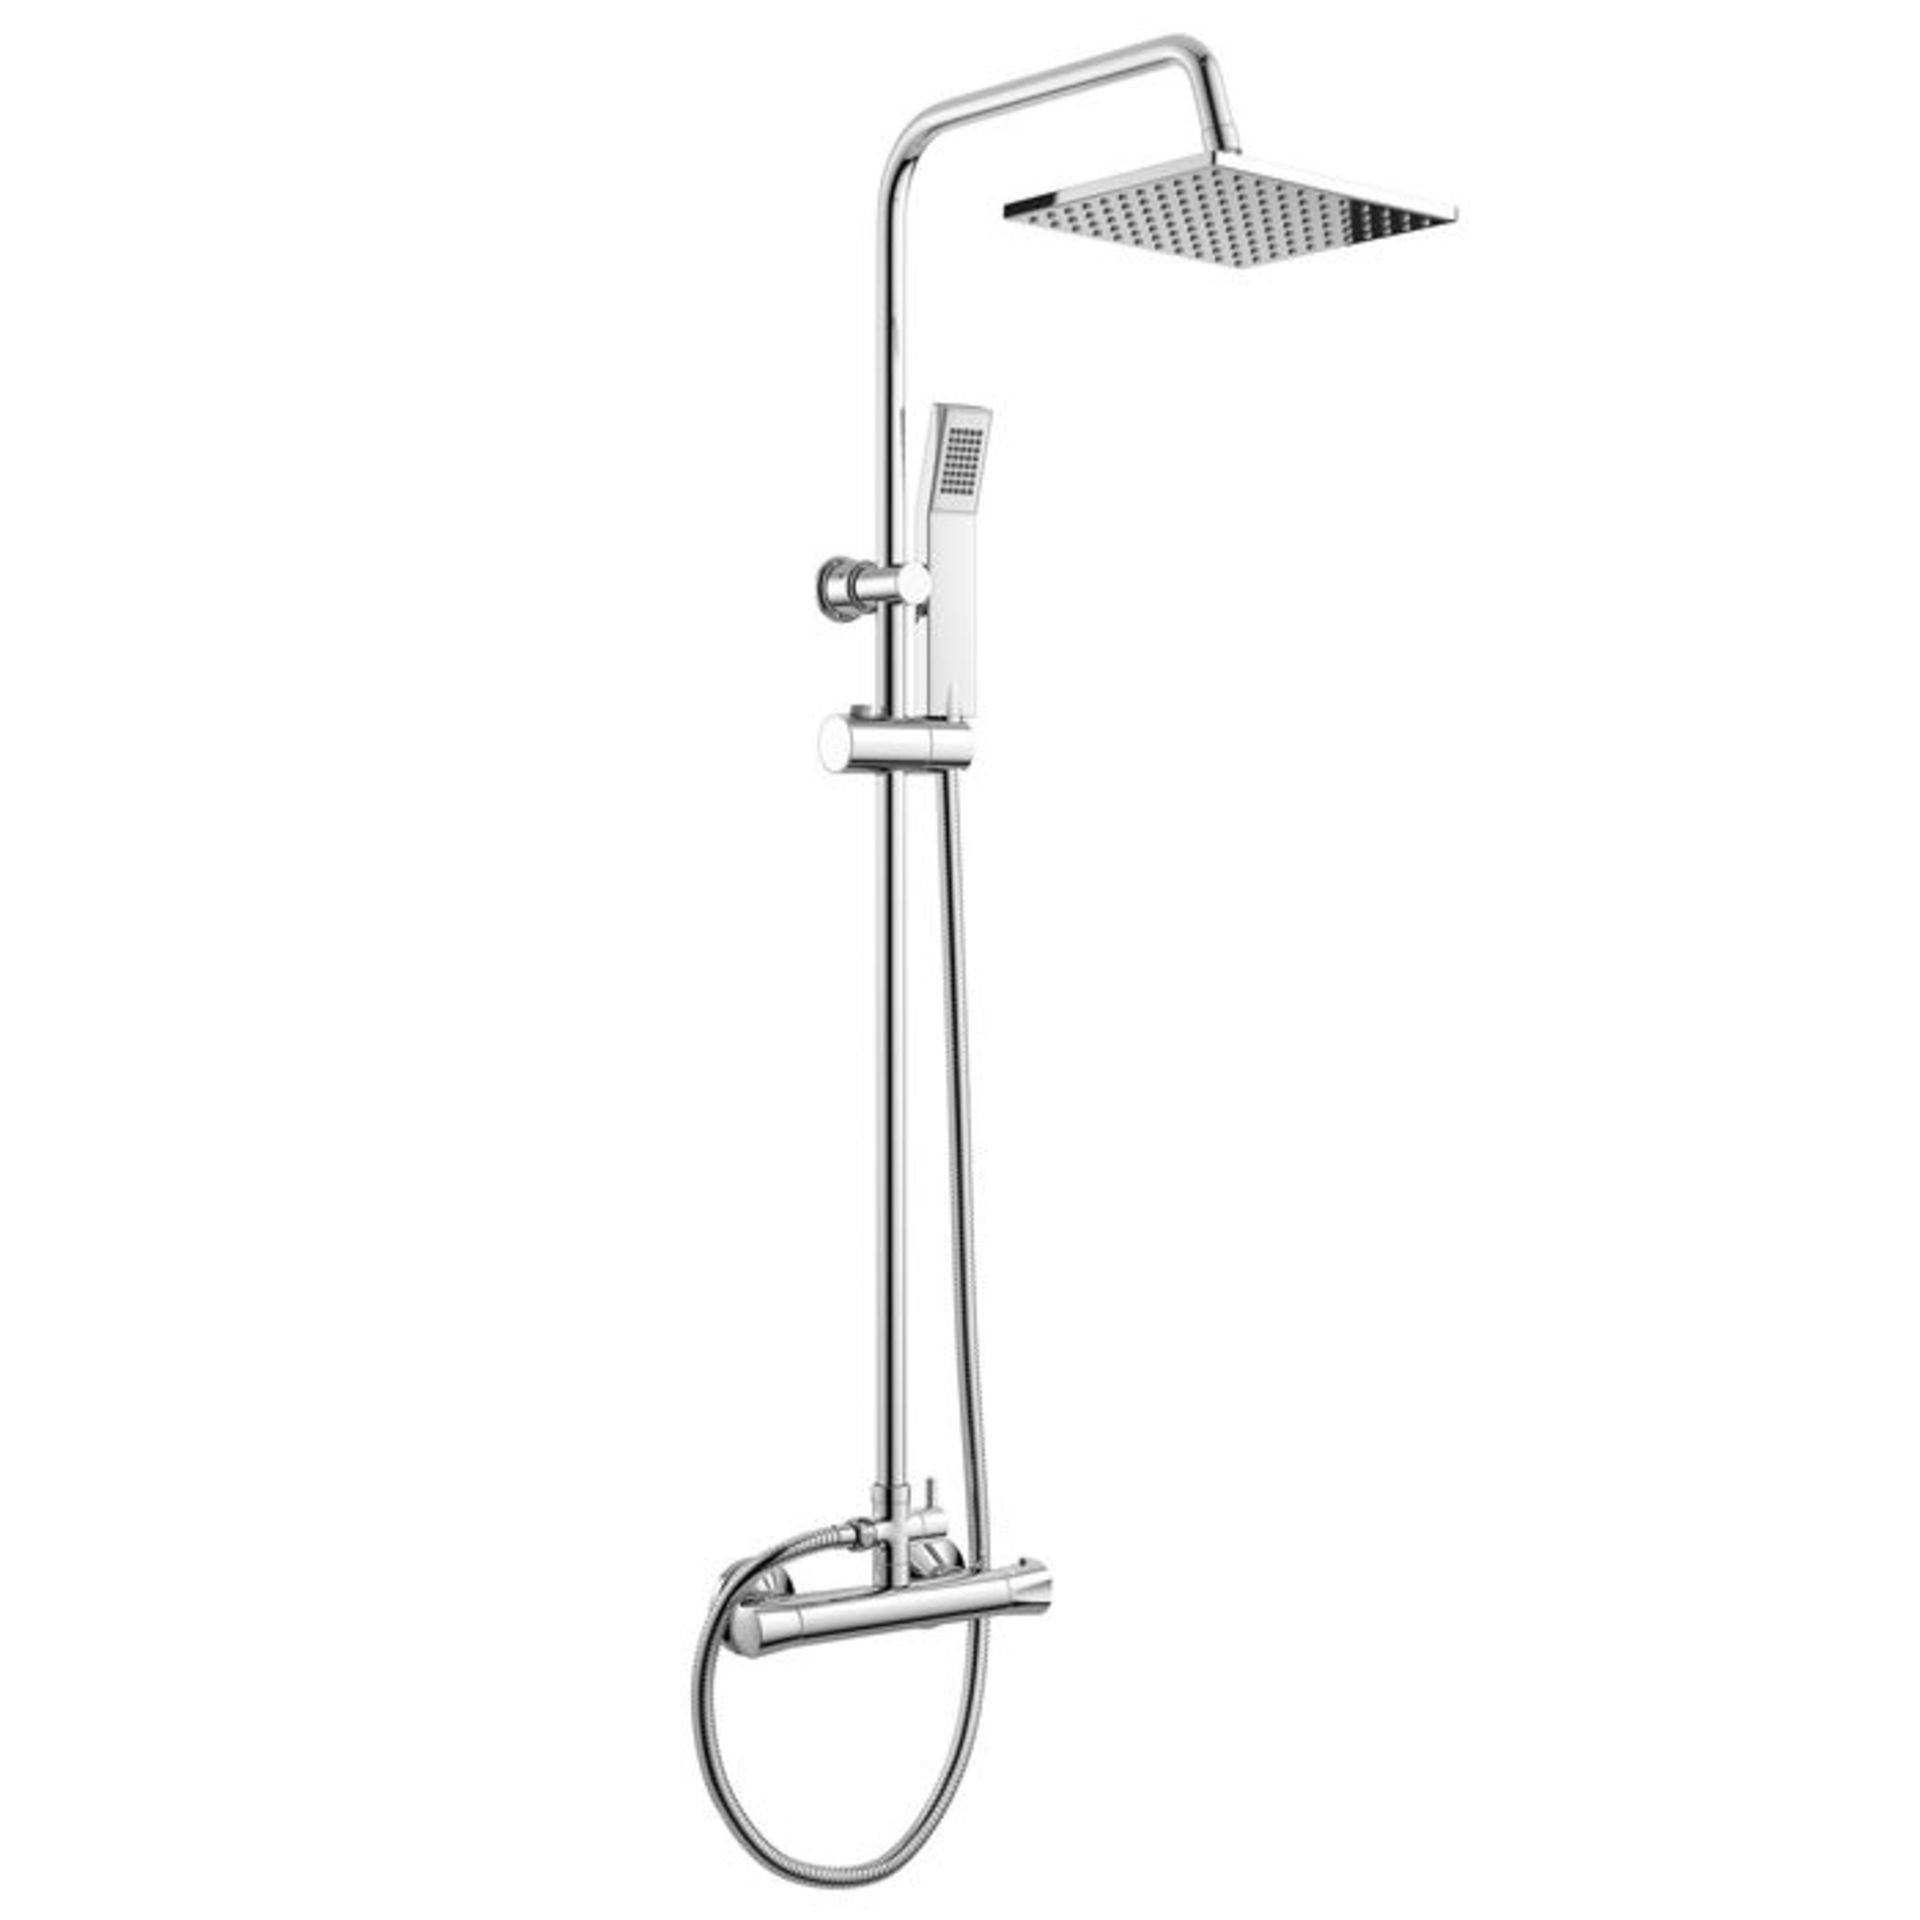 (PA215) Square Exposed Thermostatic Shower Kit Medium Head. Curved features and contemporary rounded